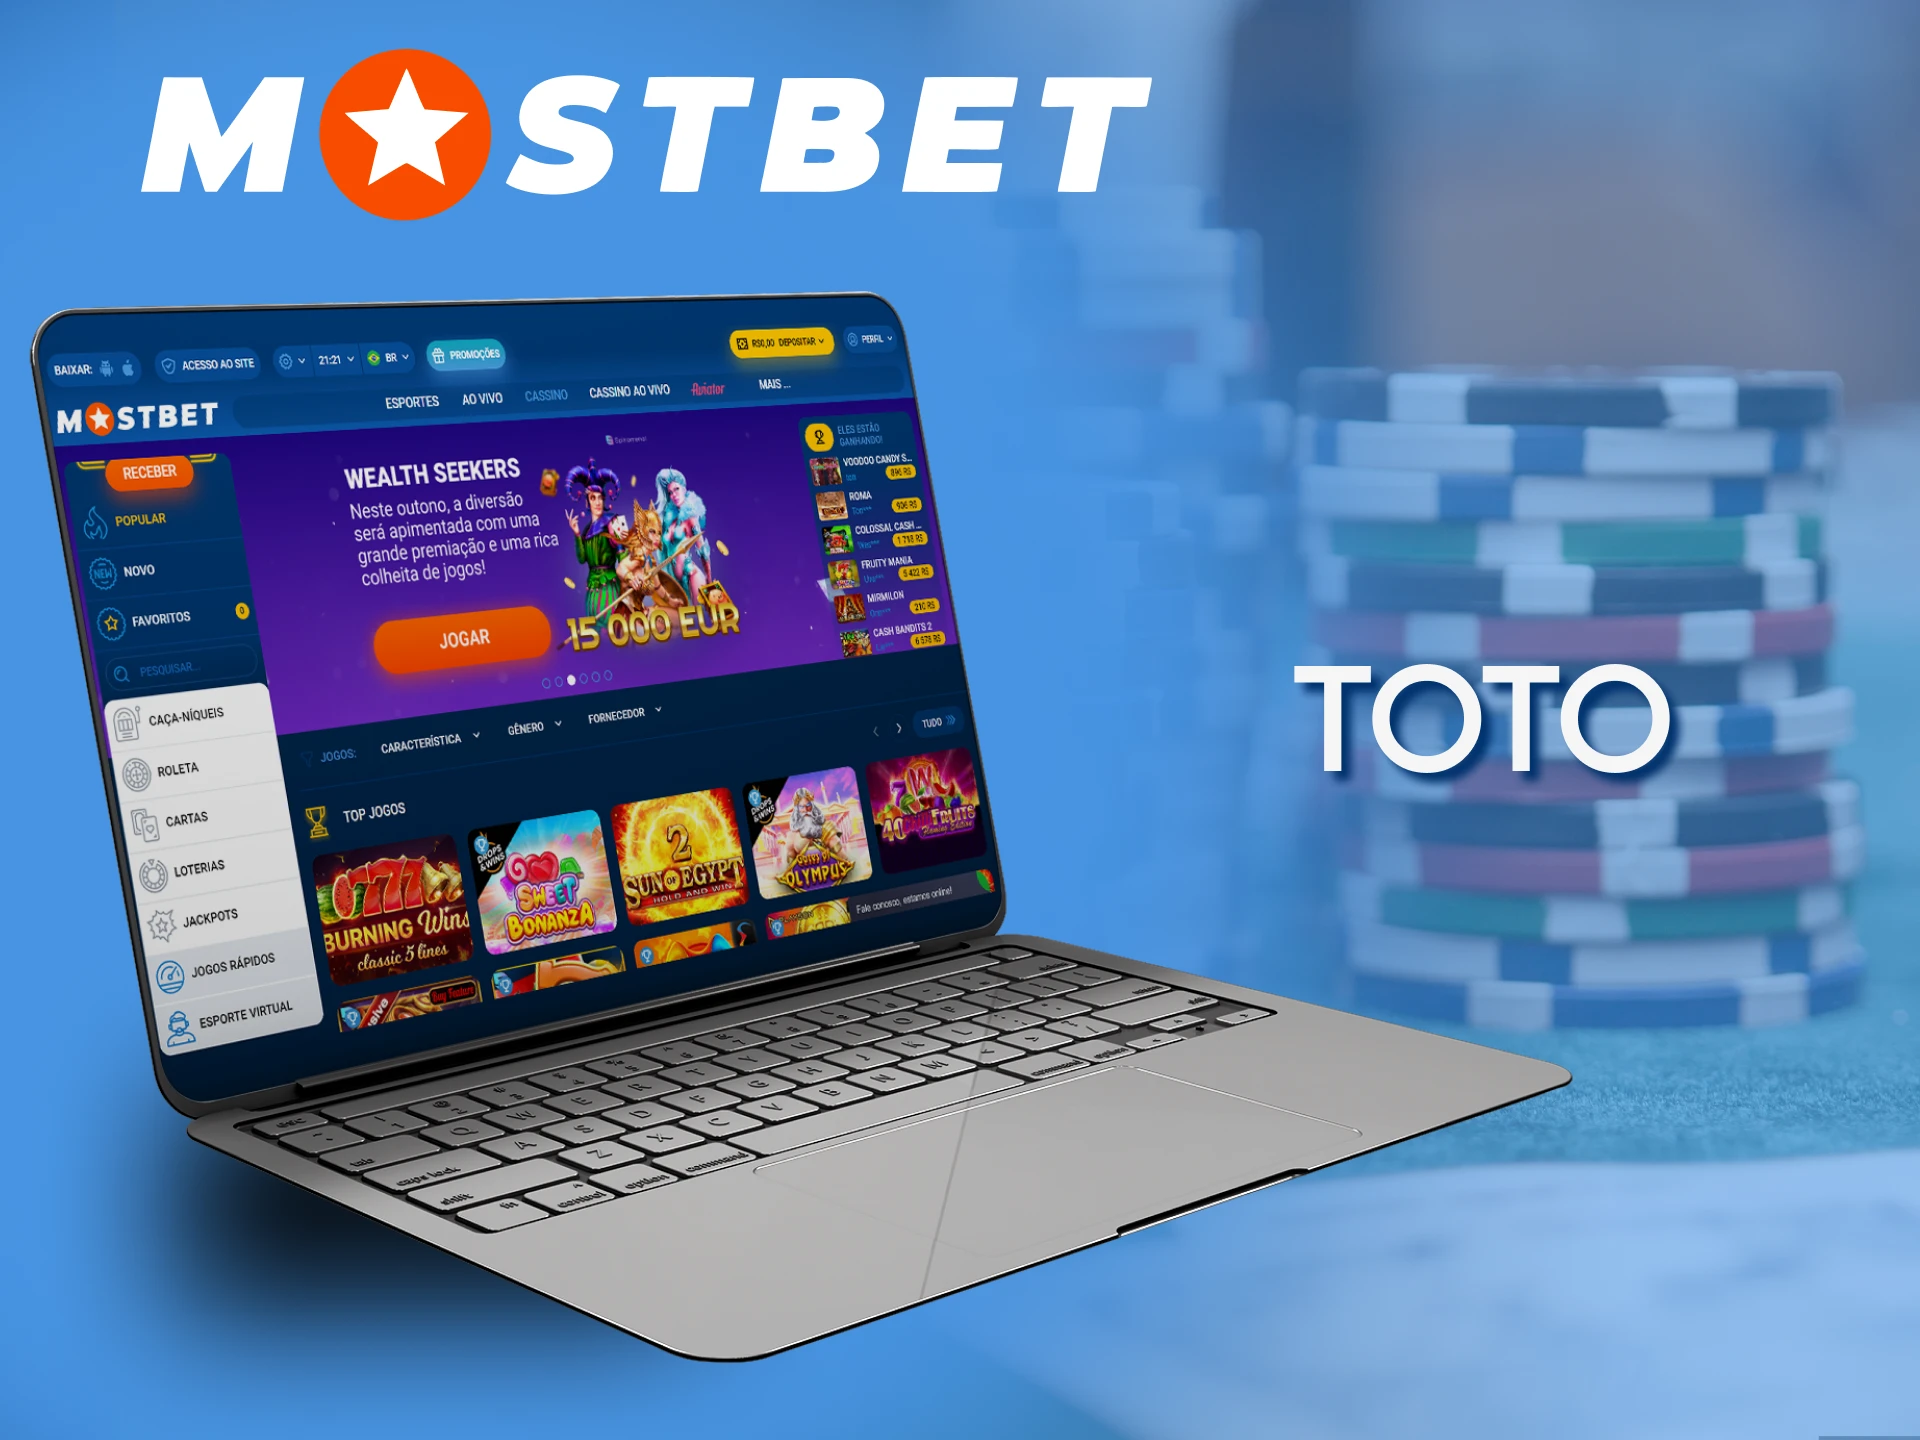 Play and bet on Mostbet on TOTO.